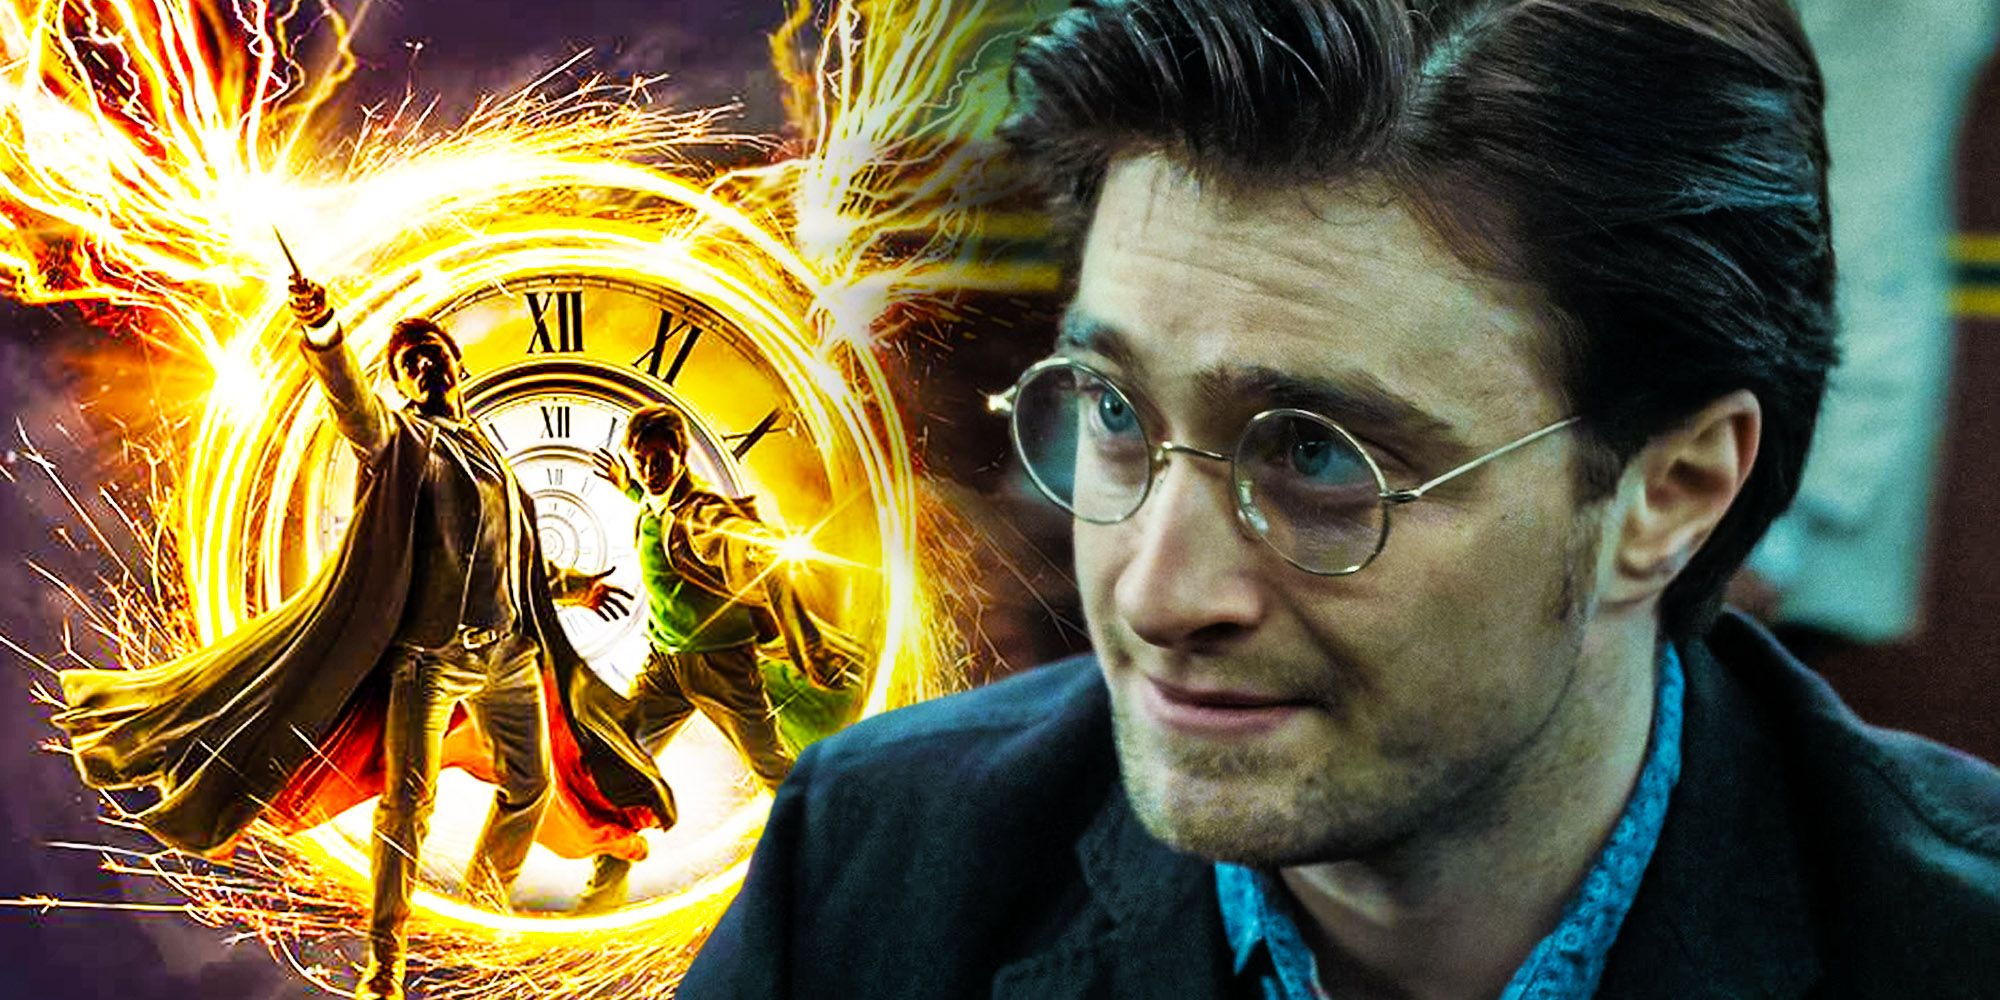 Split image of Daniel Radcliffe as Old Harry potter in Deathly Hallows Part 2 and promotional art of two wizards from The Cursed Child